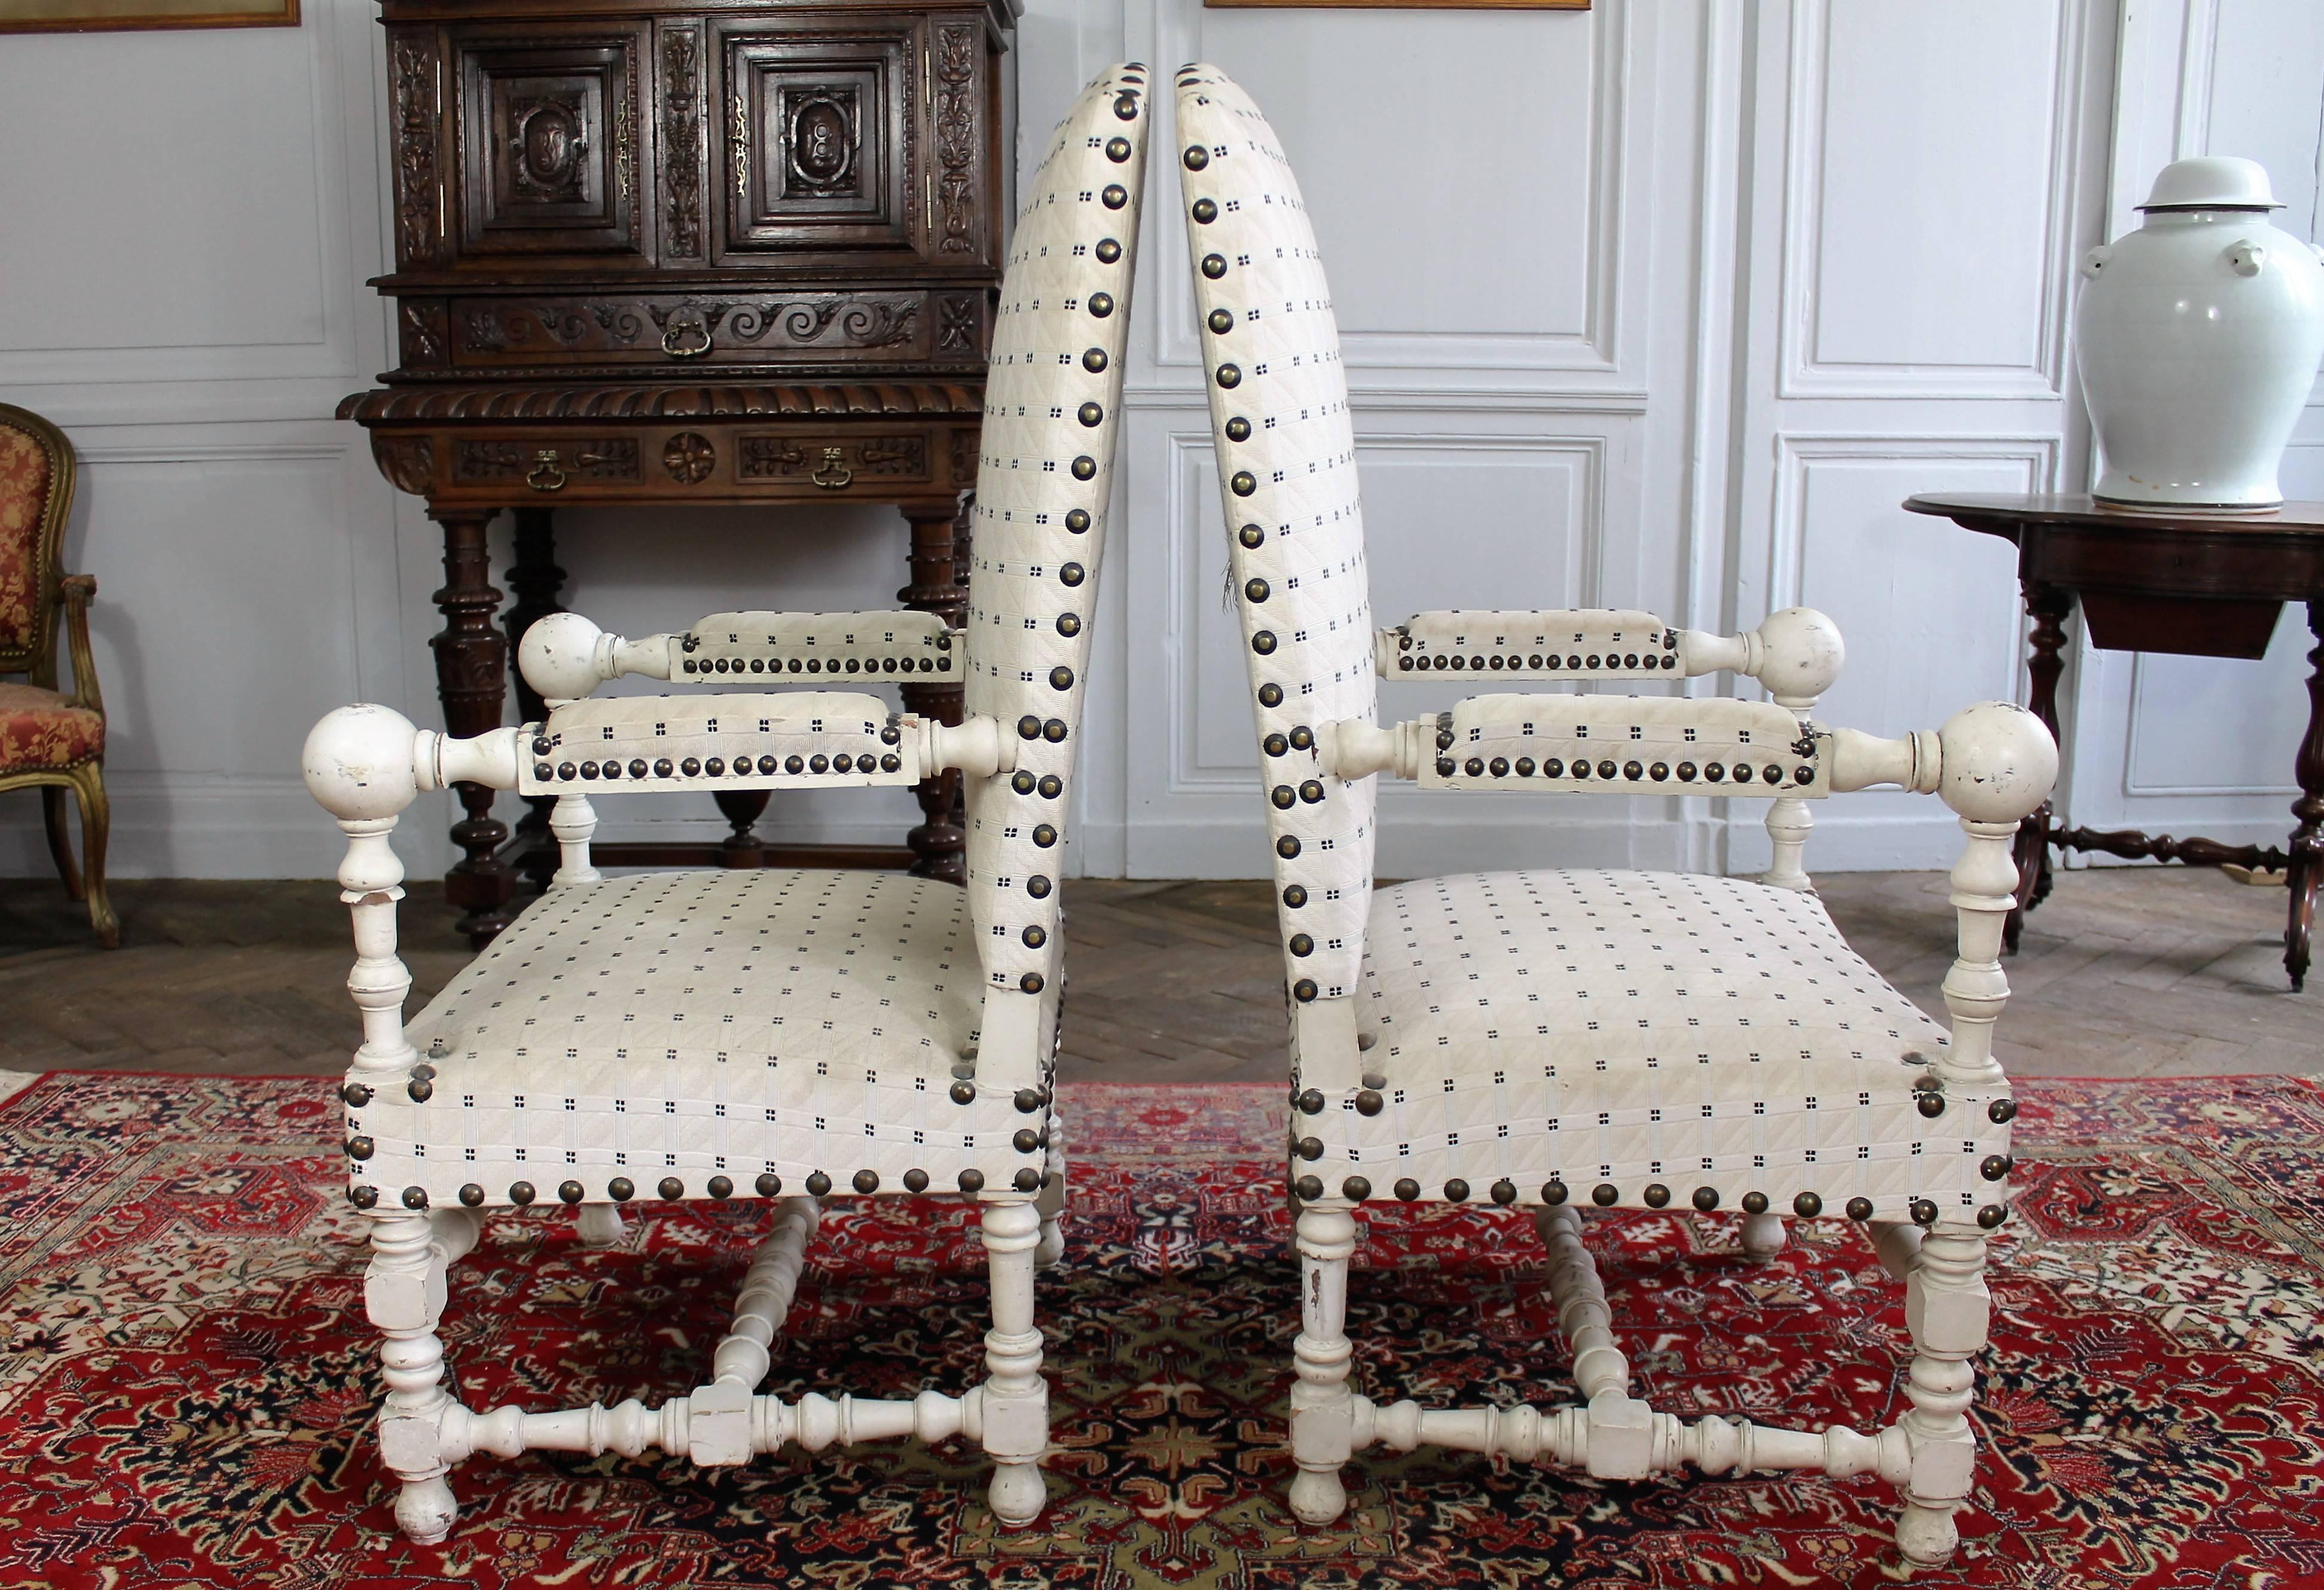 Pair of armchairs, white lacquered and upholstered in modern white and black fabric.
Louis XIII style,
19th century.